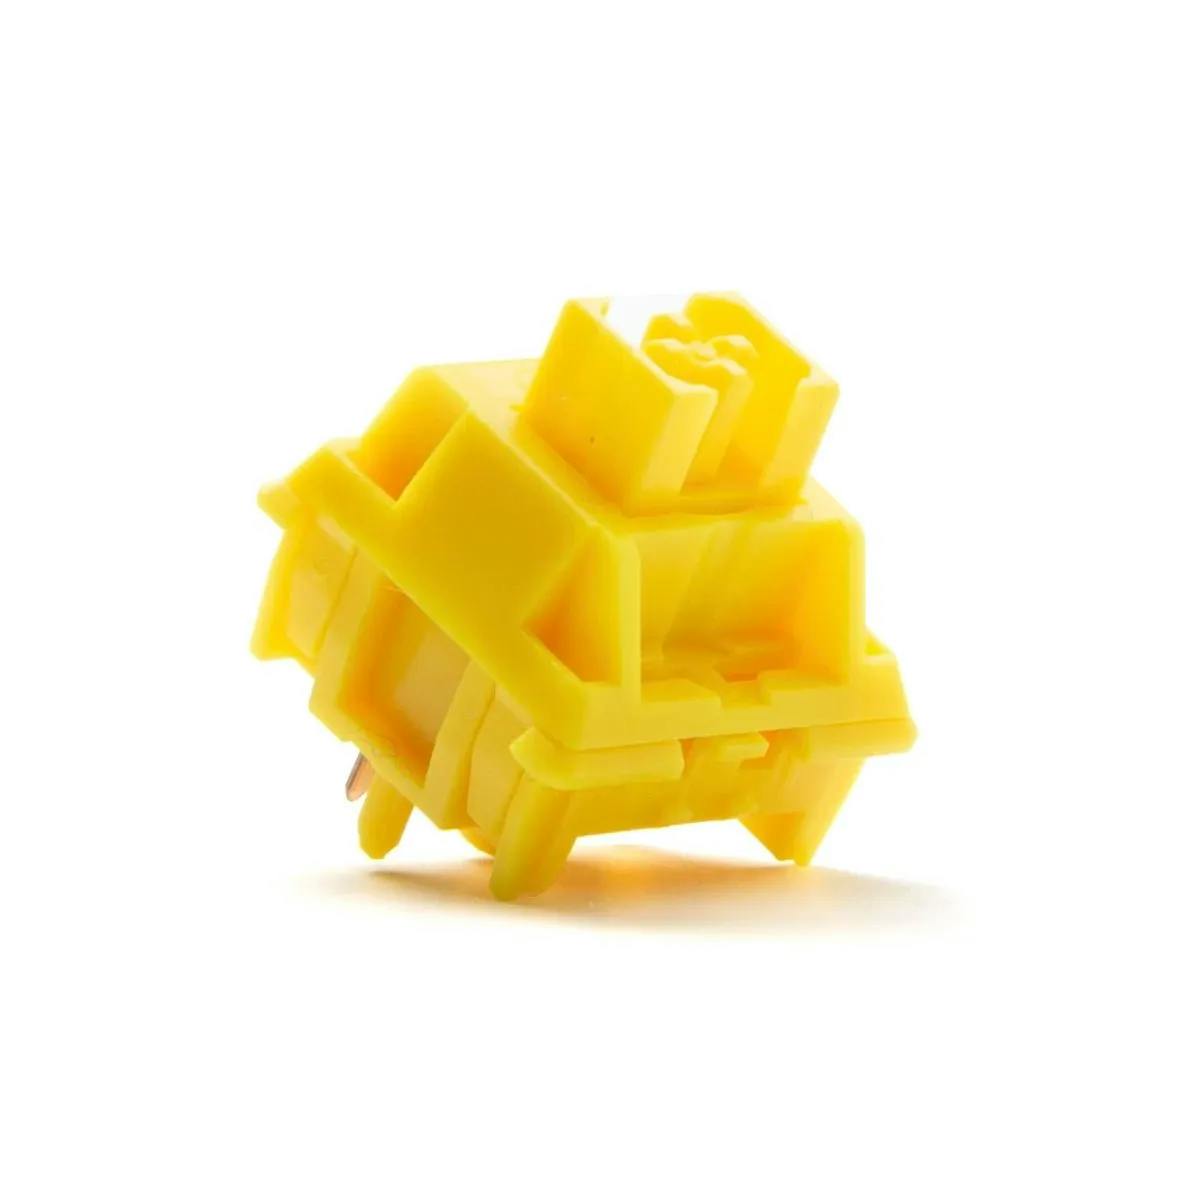 Image for Haimu x Geon HG Yellow Silent Tactile Switches